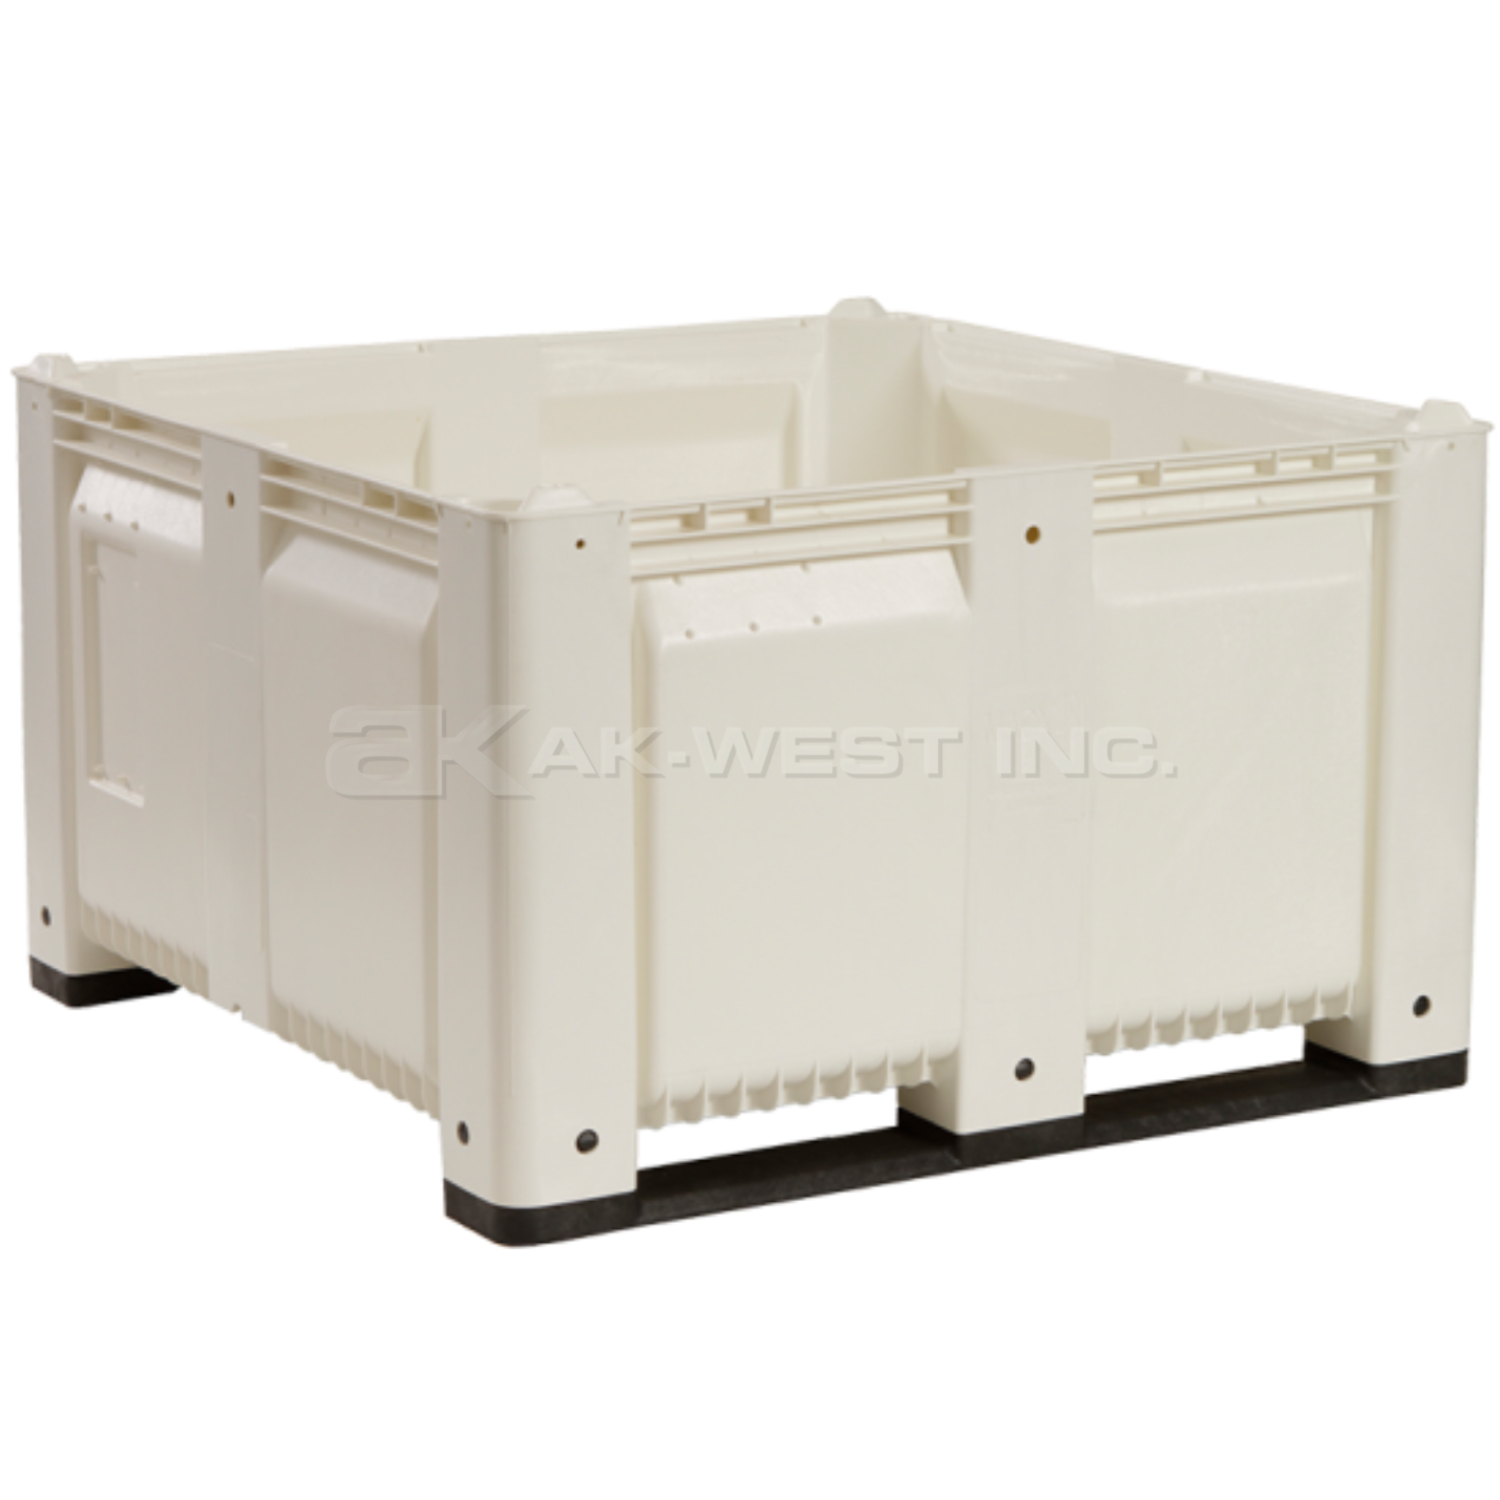 White, 48"L x 48"W x 28.5"H Bulk Container w/ Solid Sides and Base